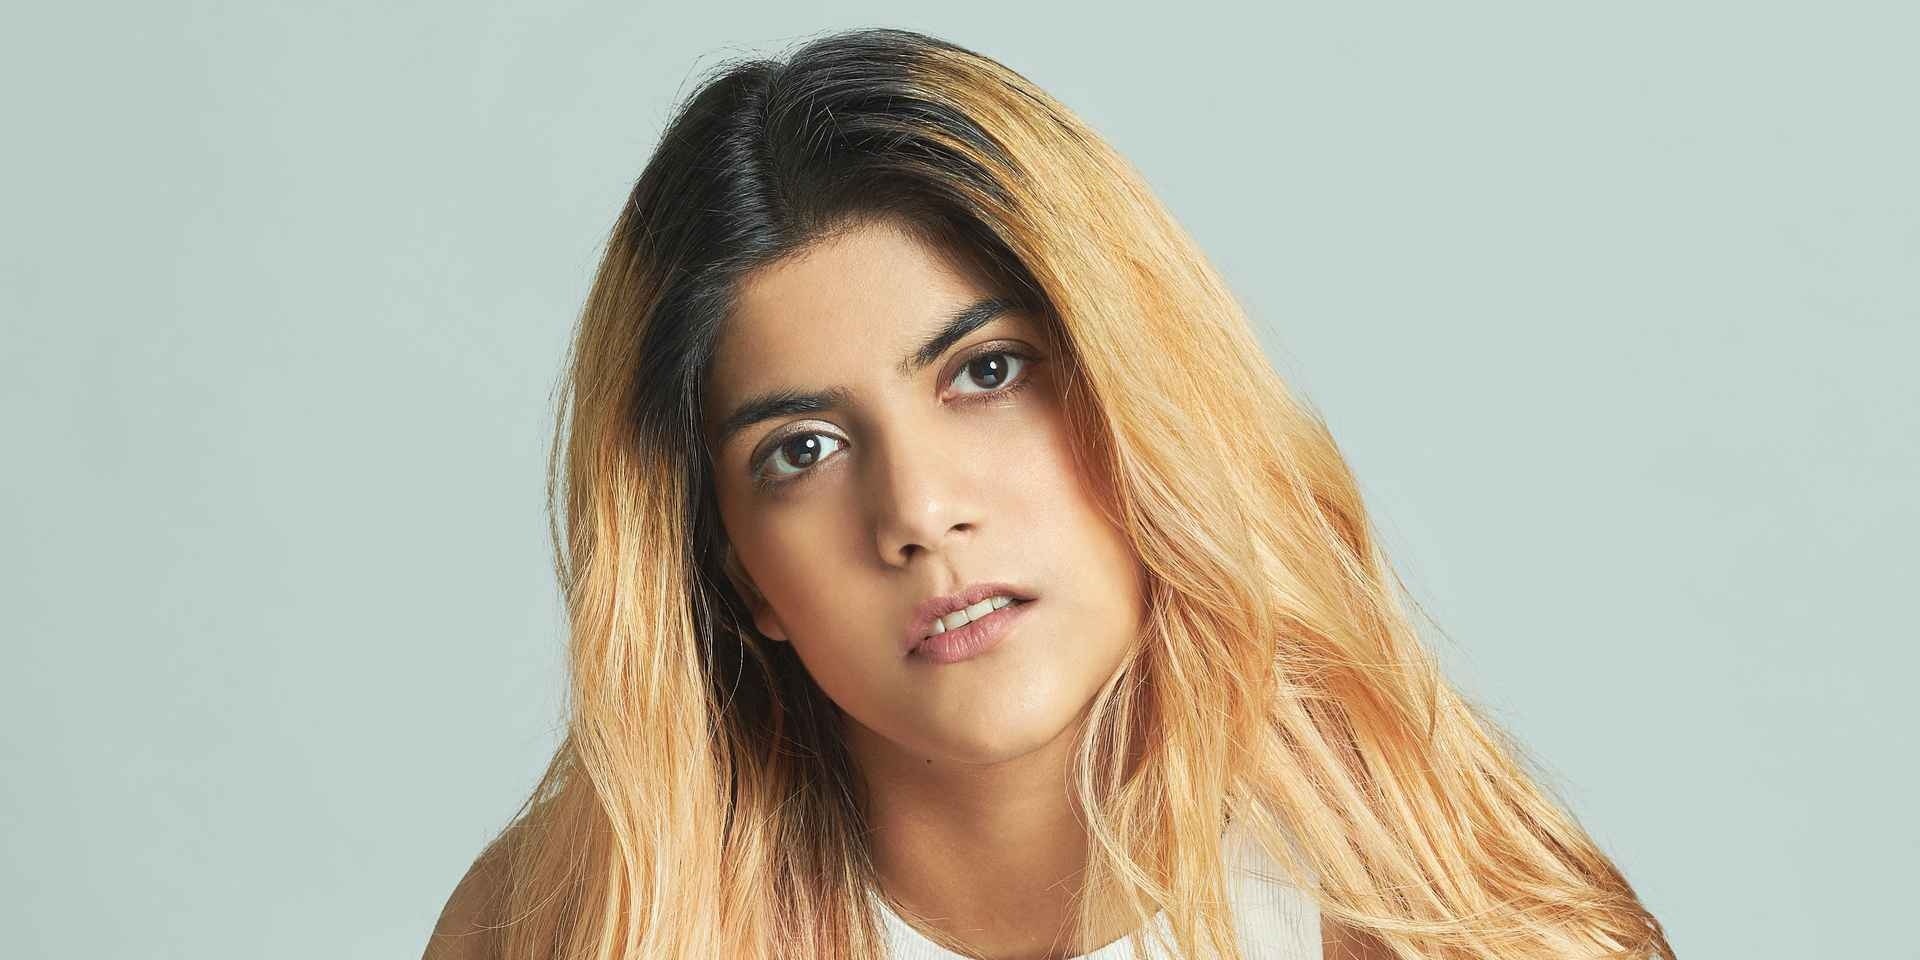 "I have definitely evolved as a person and a musician since I started out": An Interview with Ananya Birla